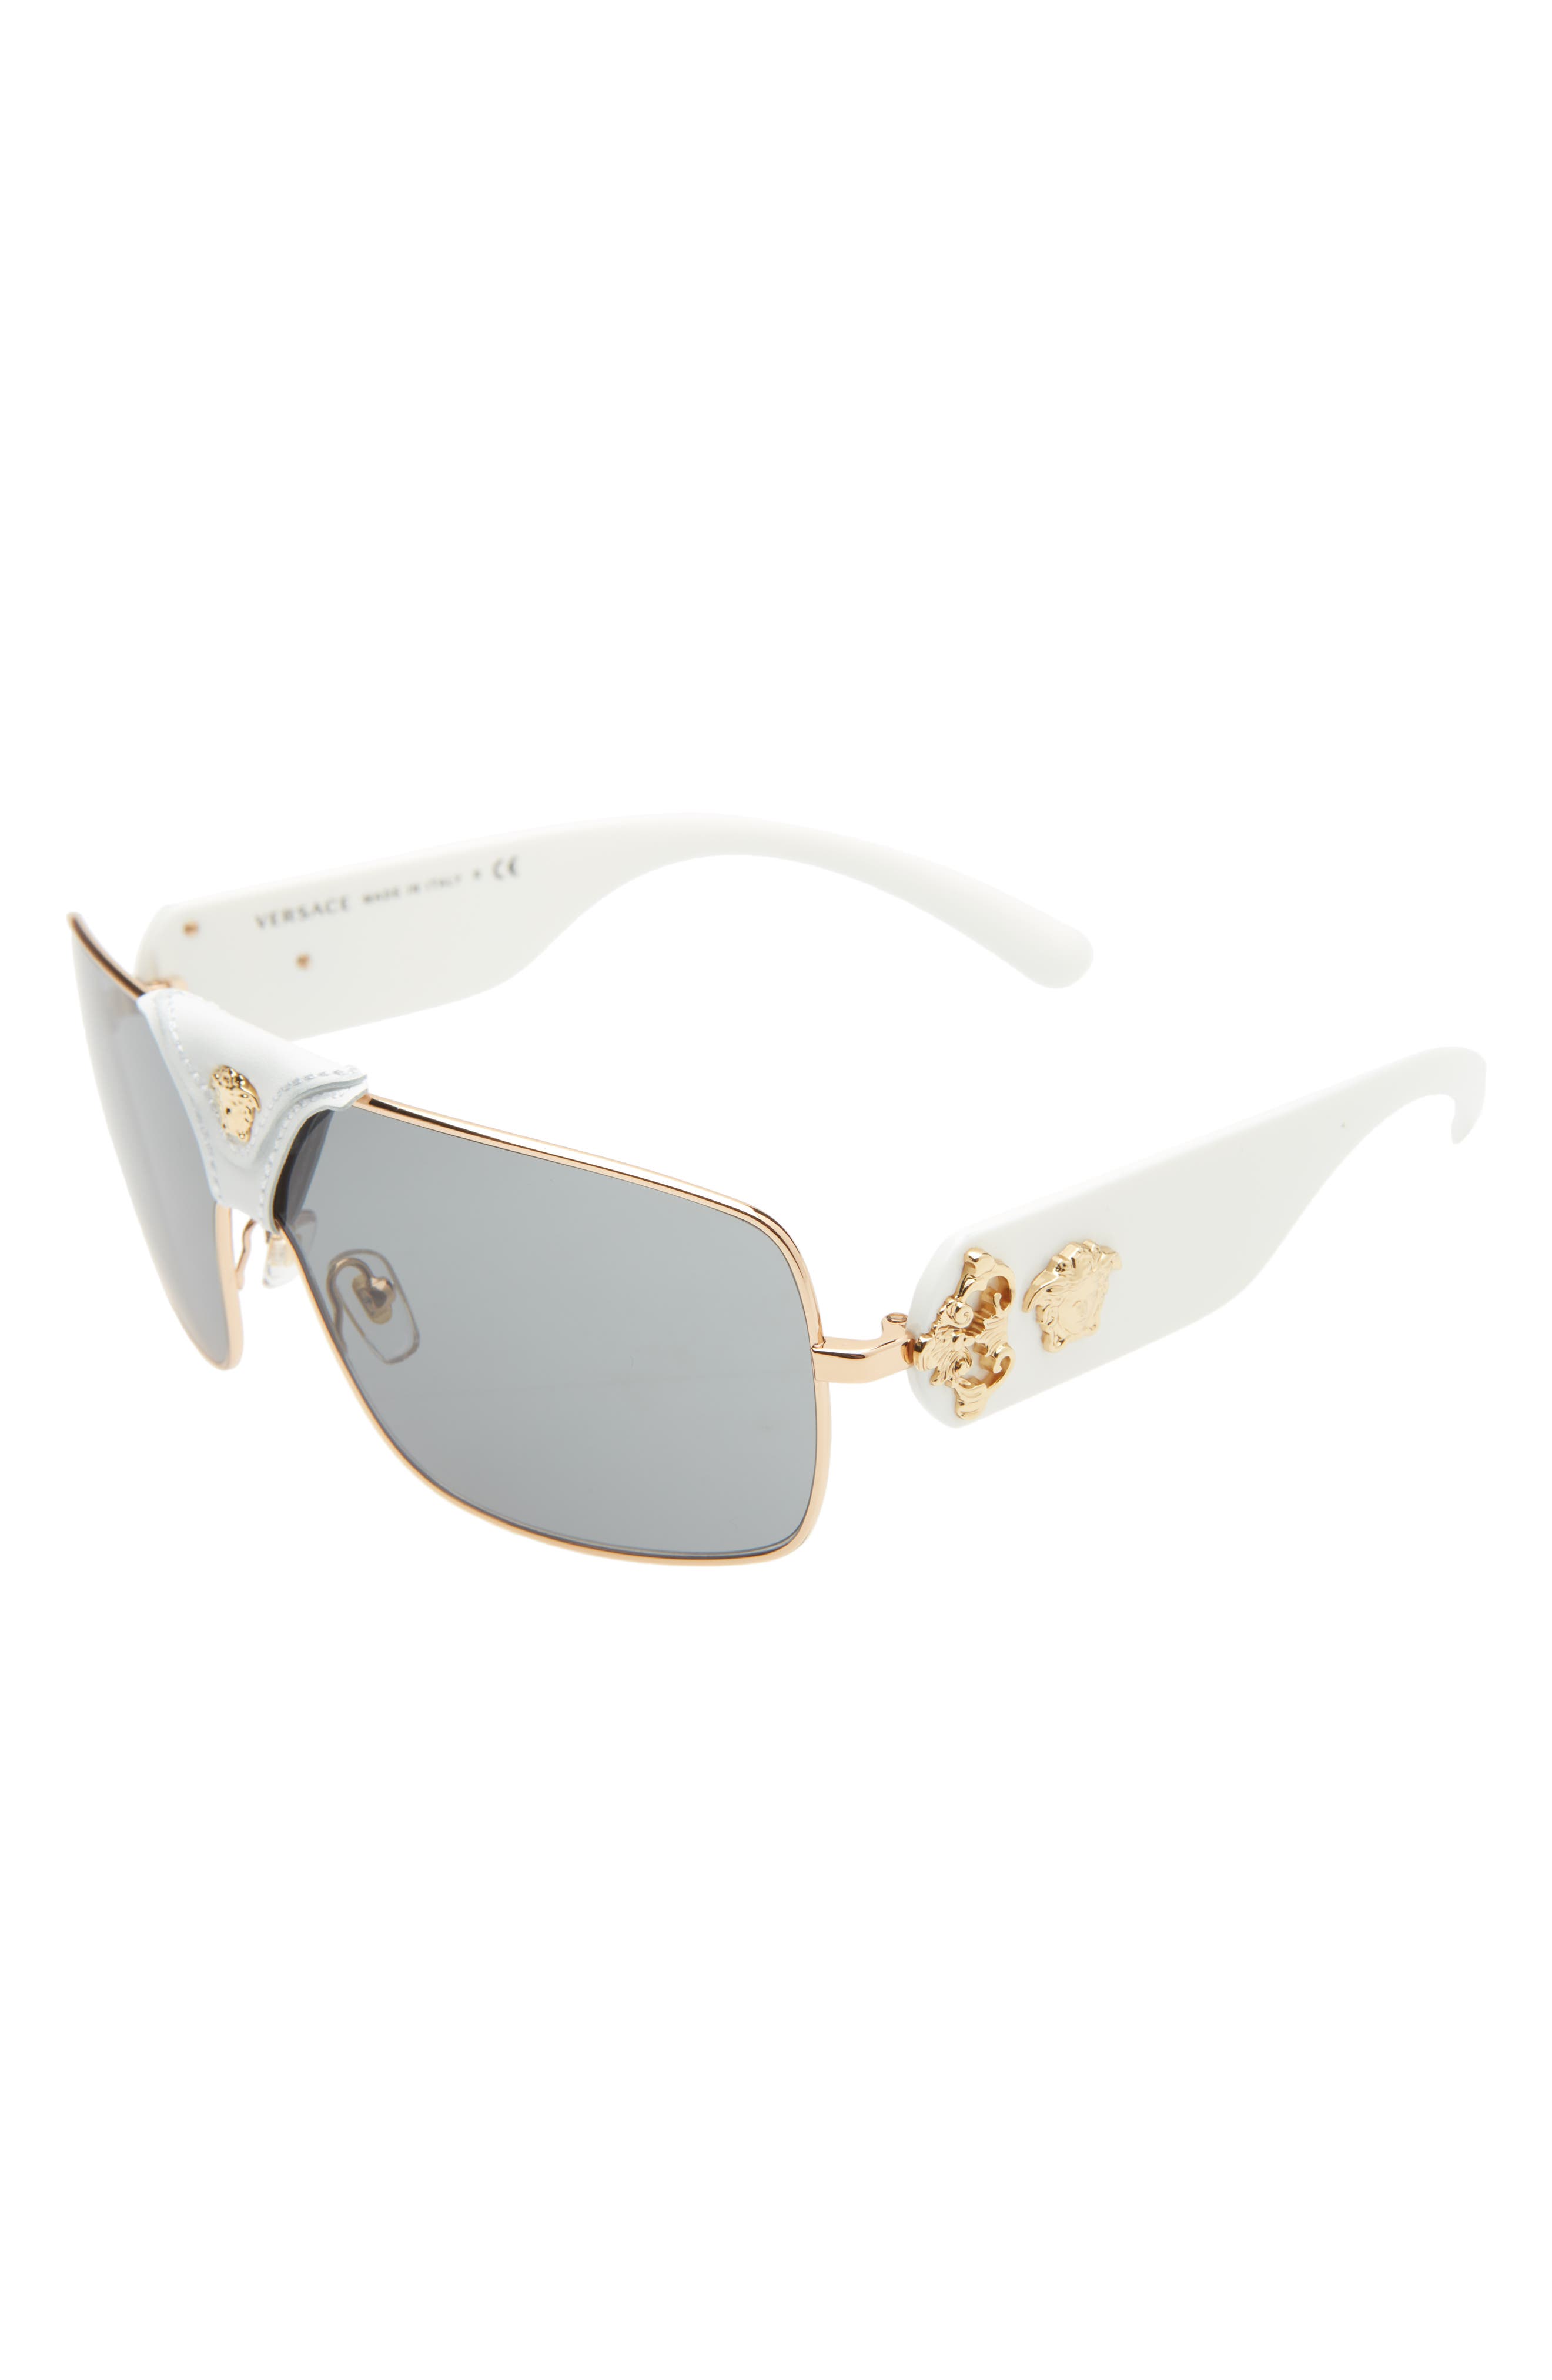 Versace 145mm Mirrored Shield Sunglasses in Gold/Grey at Nordstrom